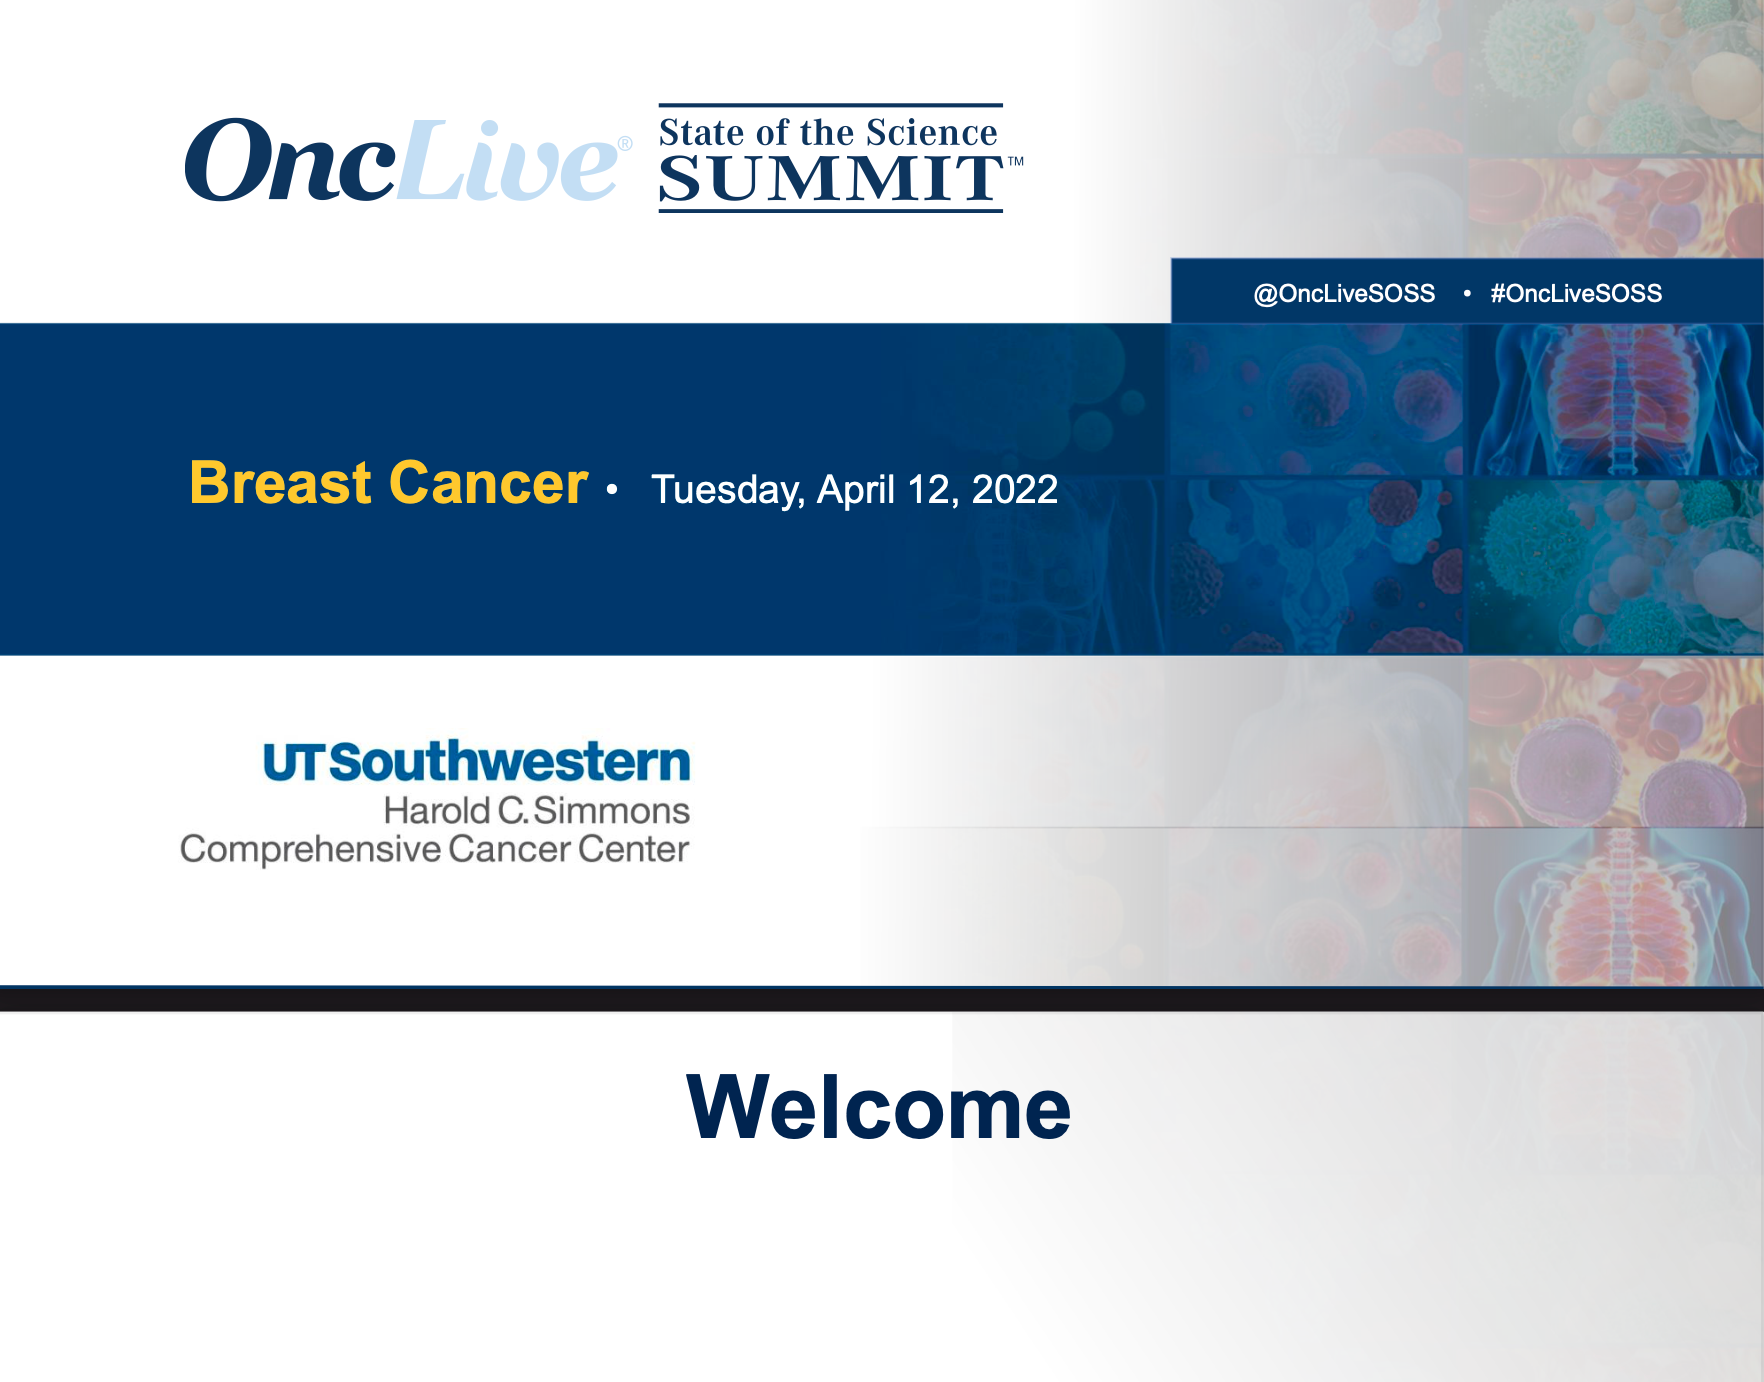 State of Science Summit- Breast Cancer: Chaired by Heather McArthur, MD